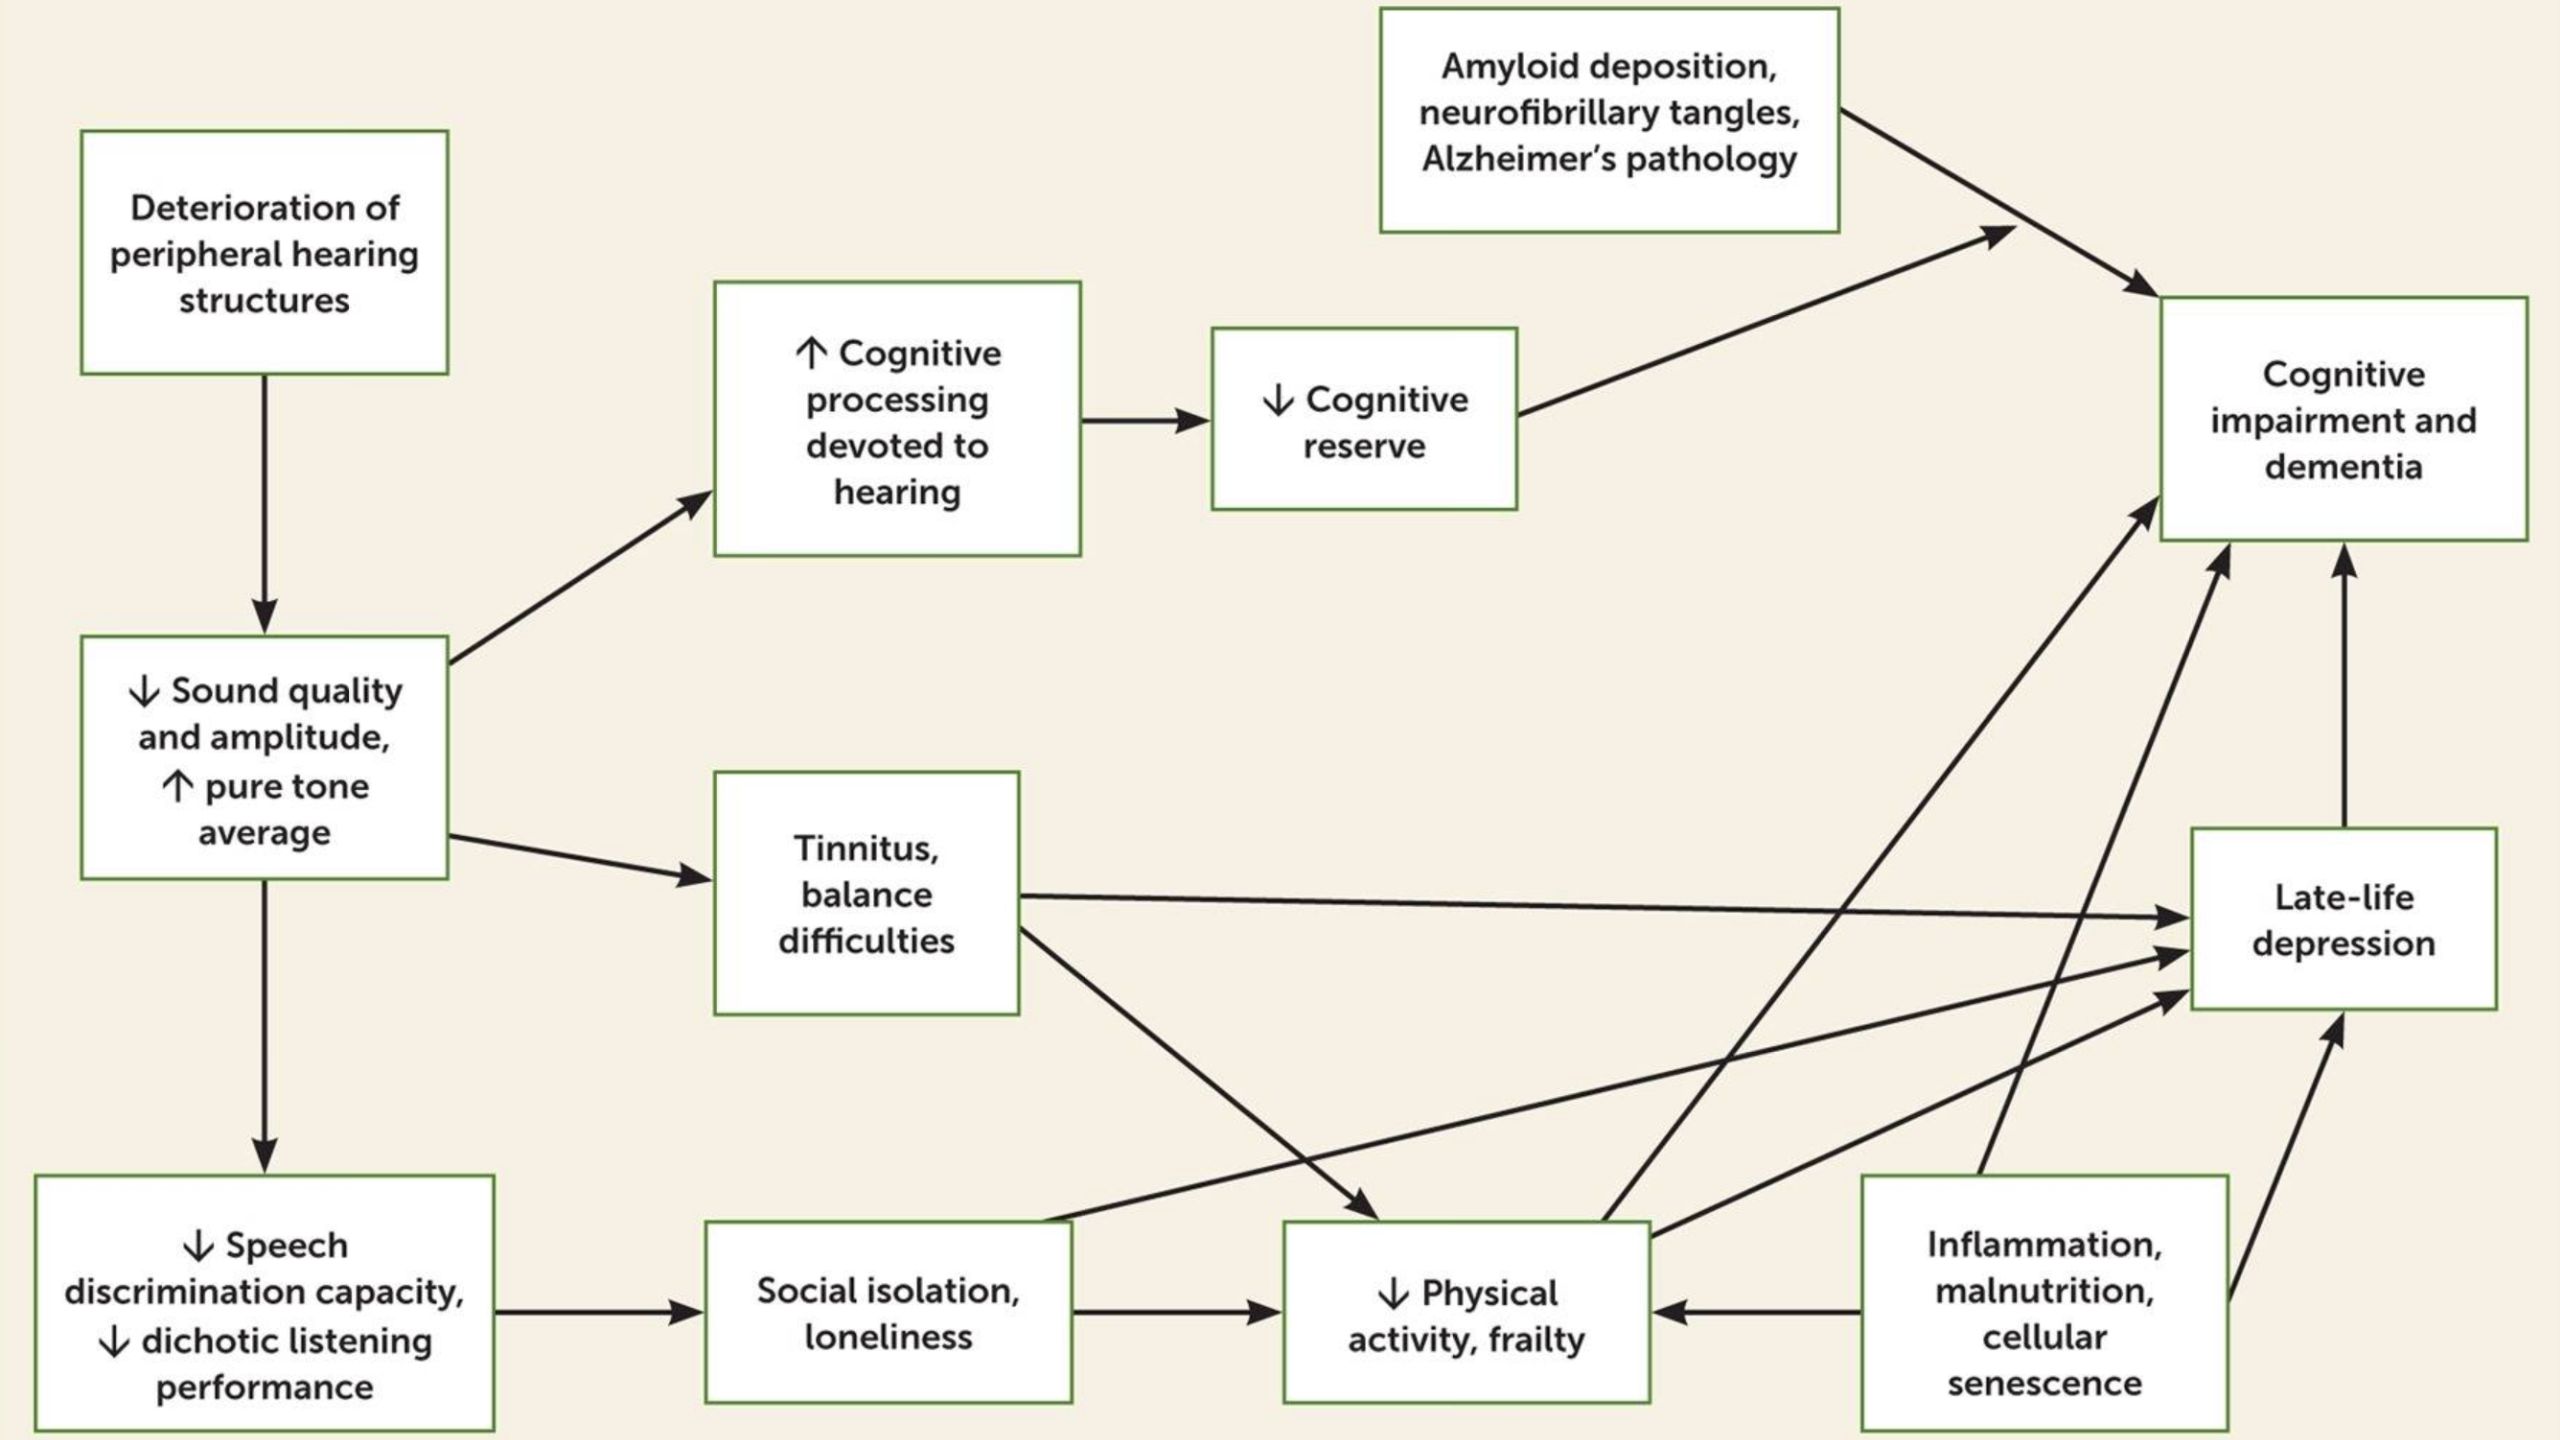 A flowchart depicting the clinical and behavioral mediators linking age-related hearing loss to neuropsychiatric dysfunction.